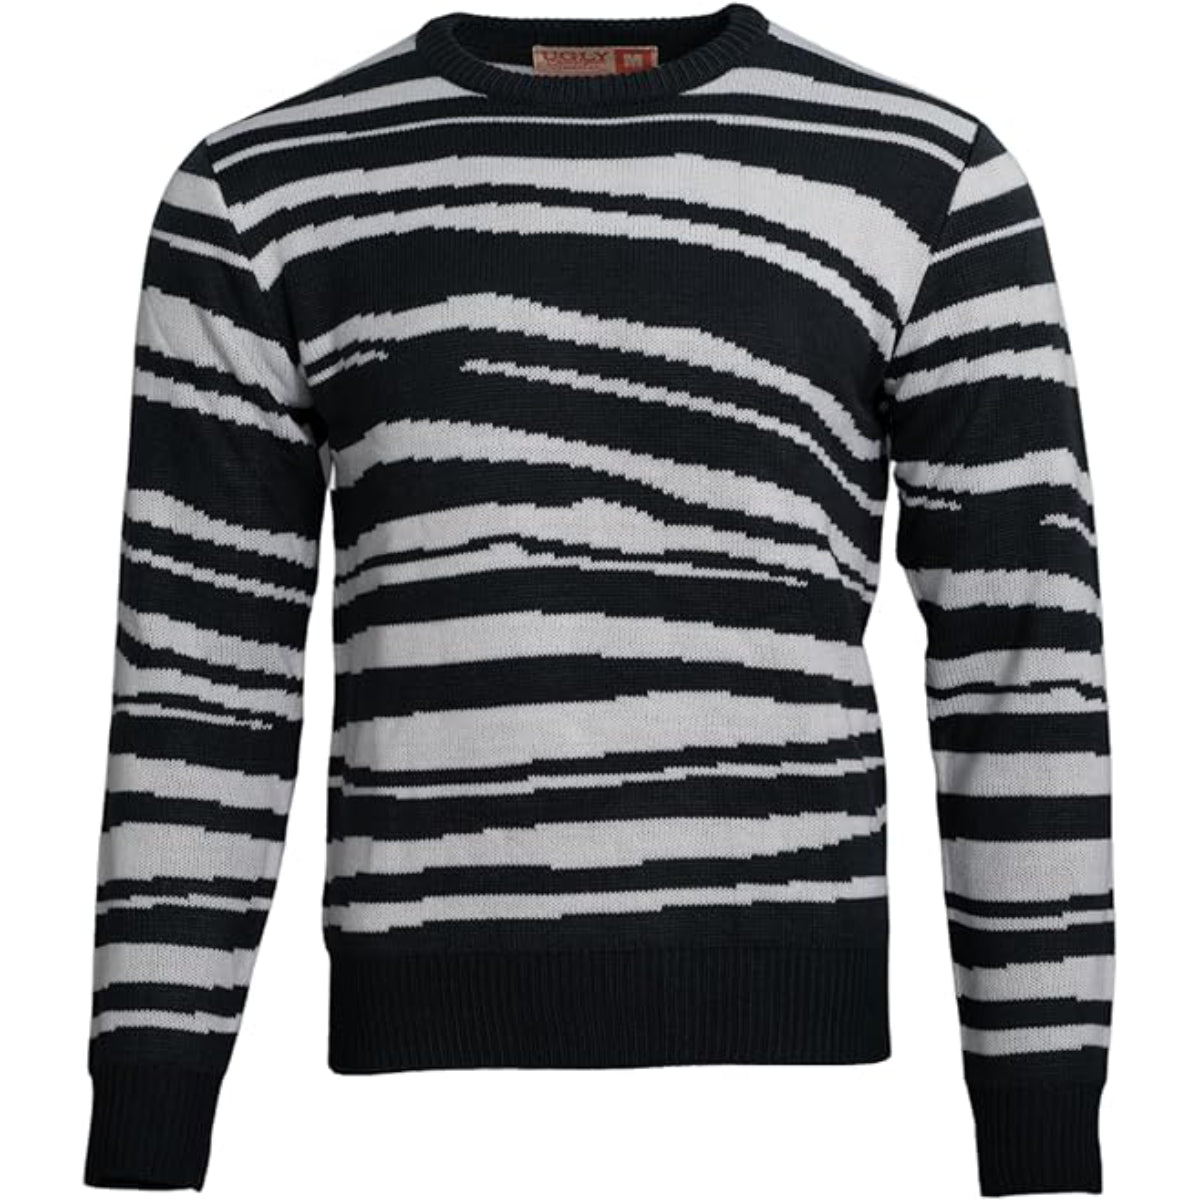 Pugley Spooky Black and White Sweater for Cosplay Perfect for Your Spooky Family Halloween Costume Front